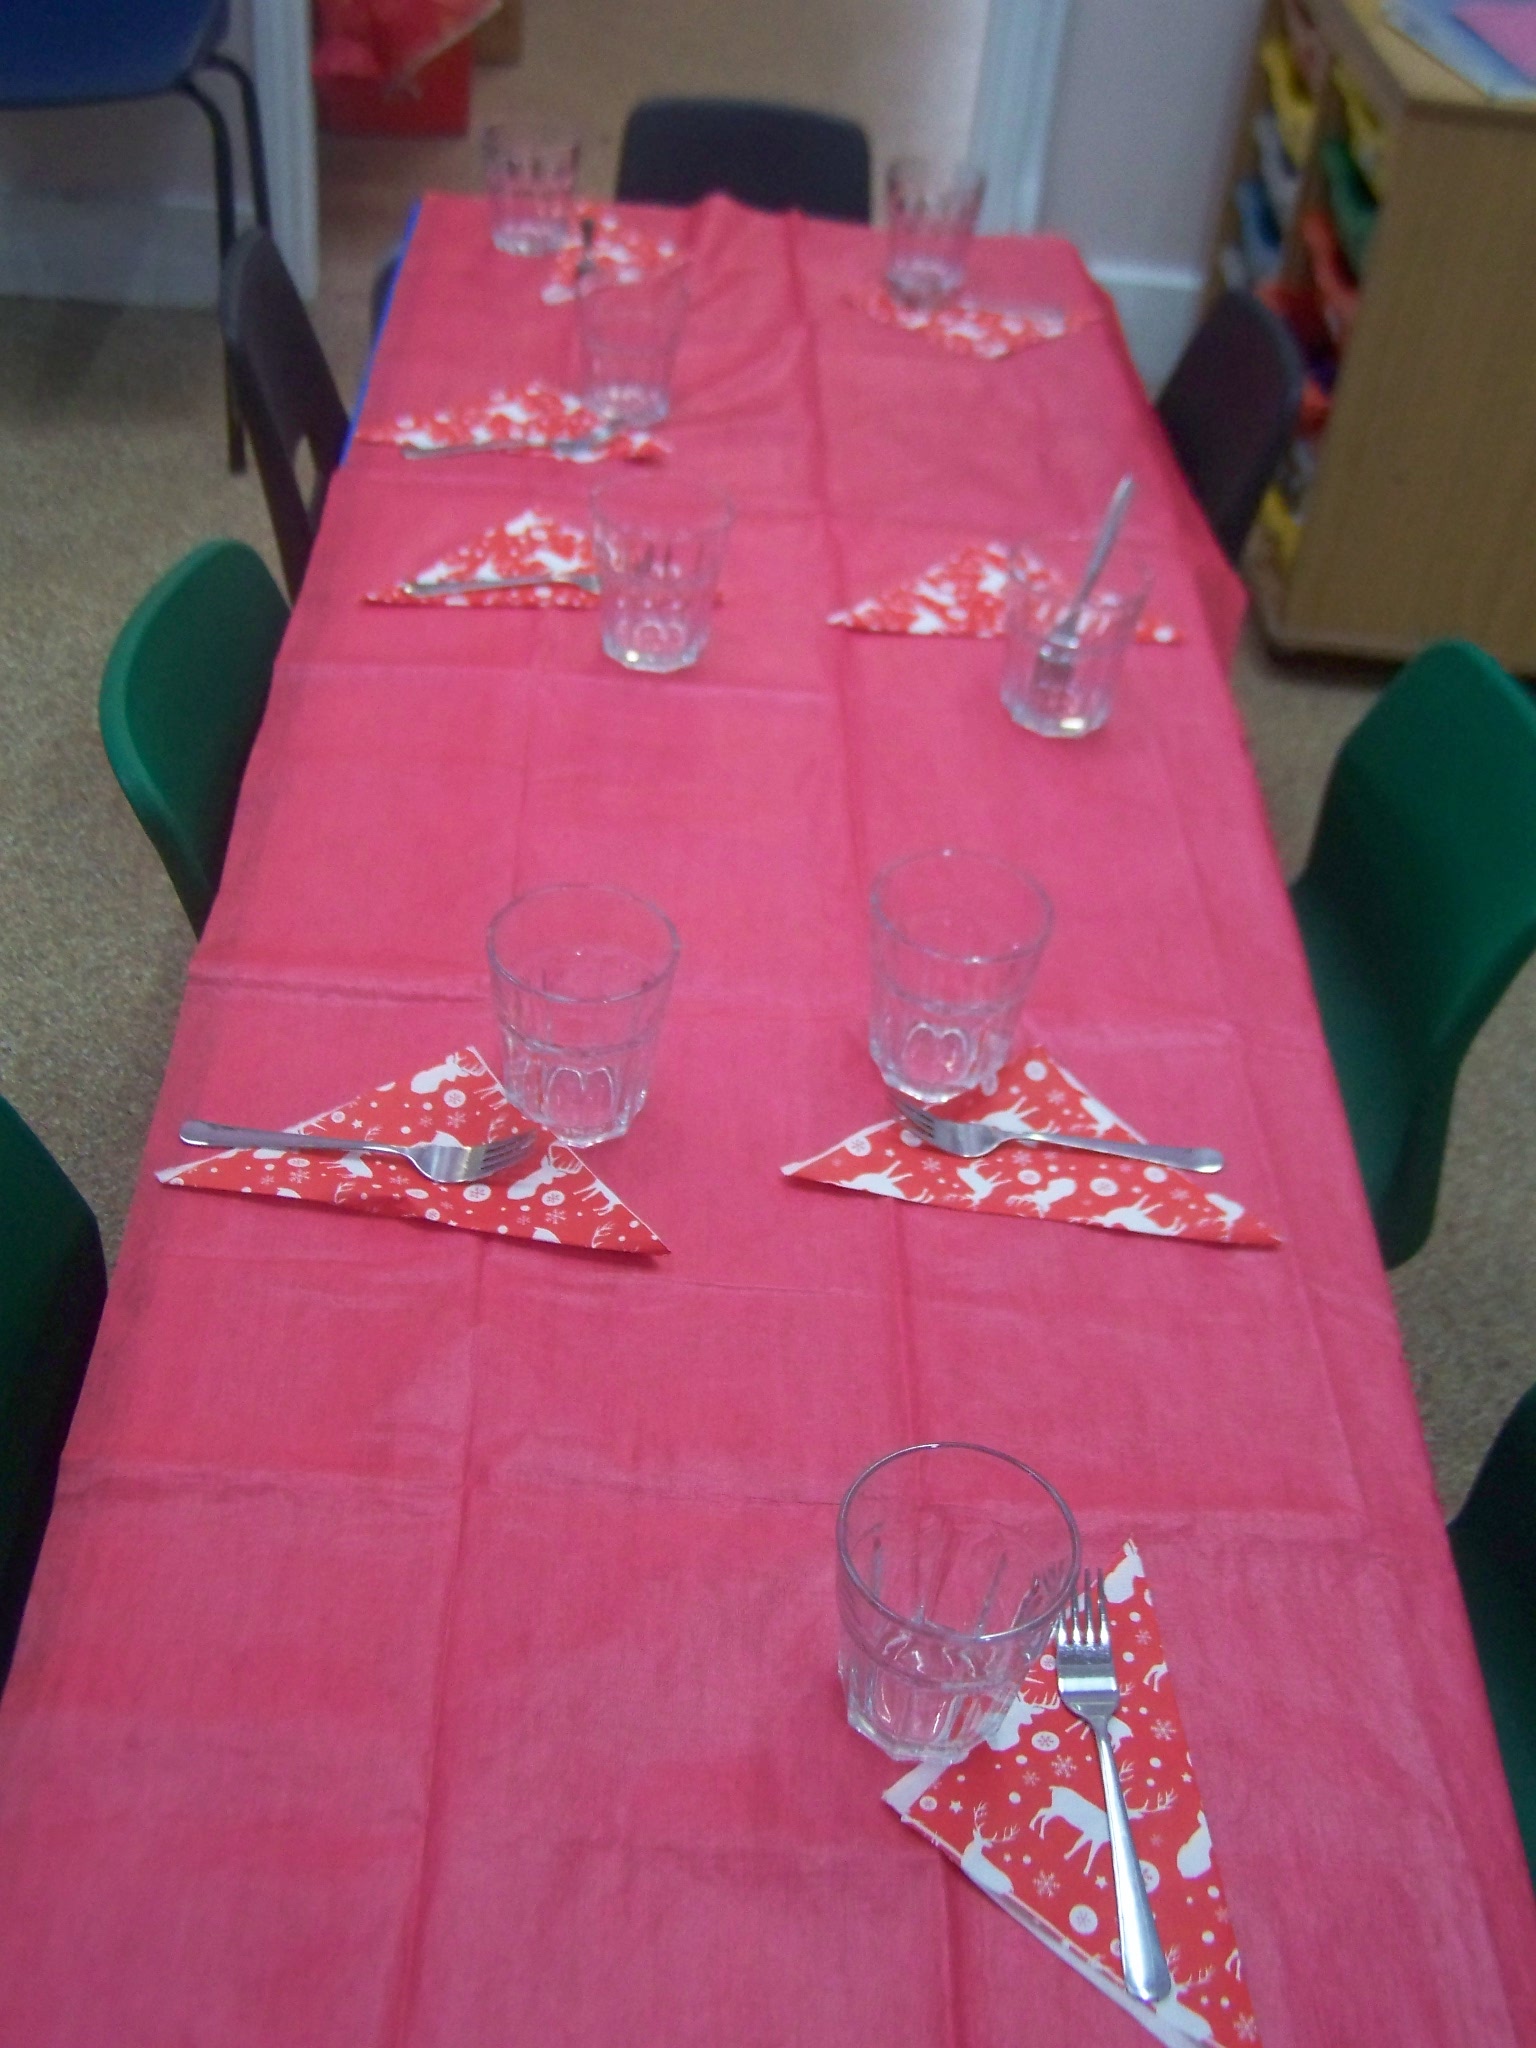 tables all set